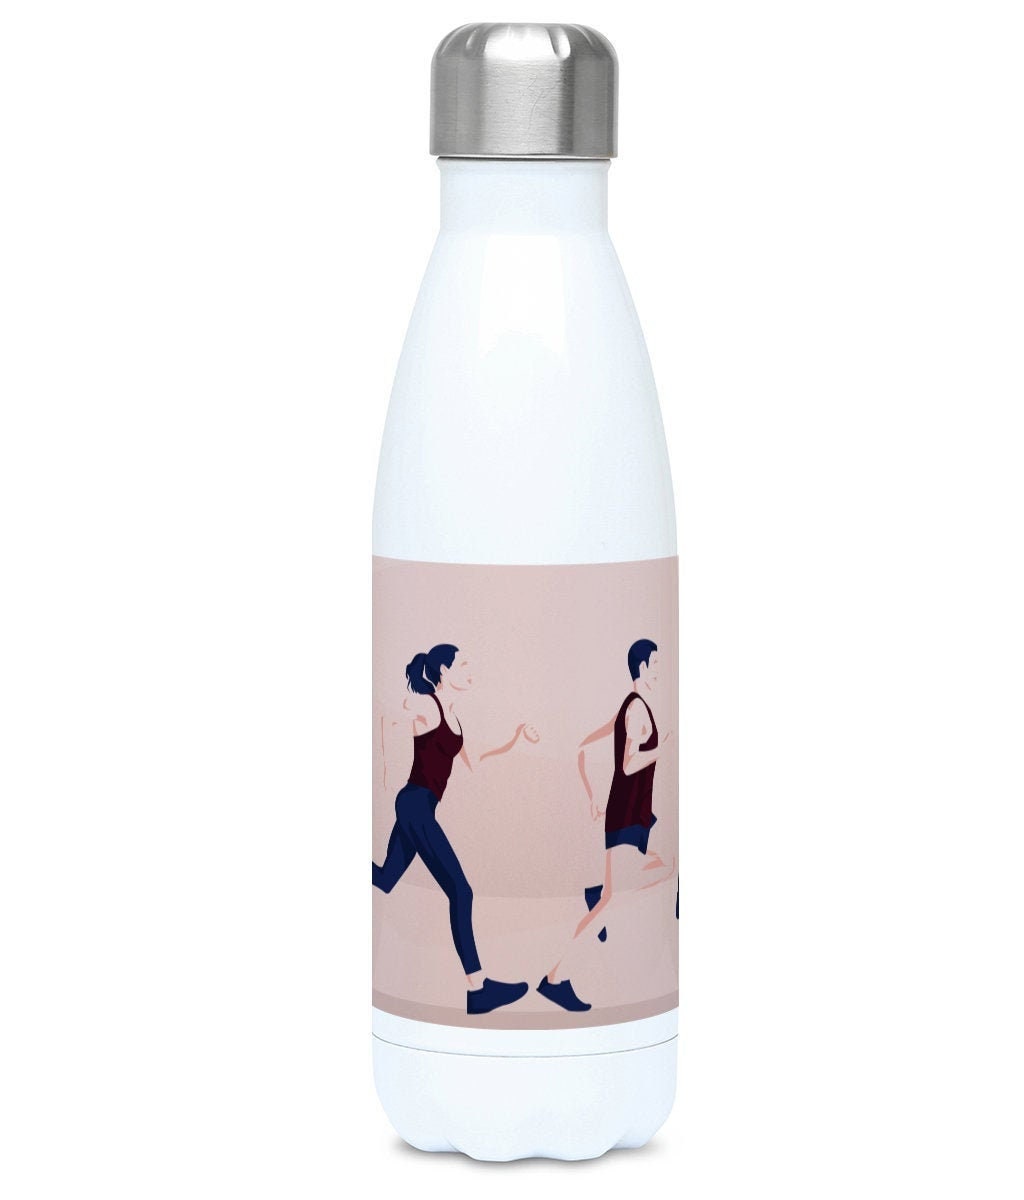 Insulated bottle Athletics race "A man and a woman running" - Customizable